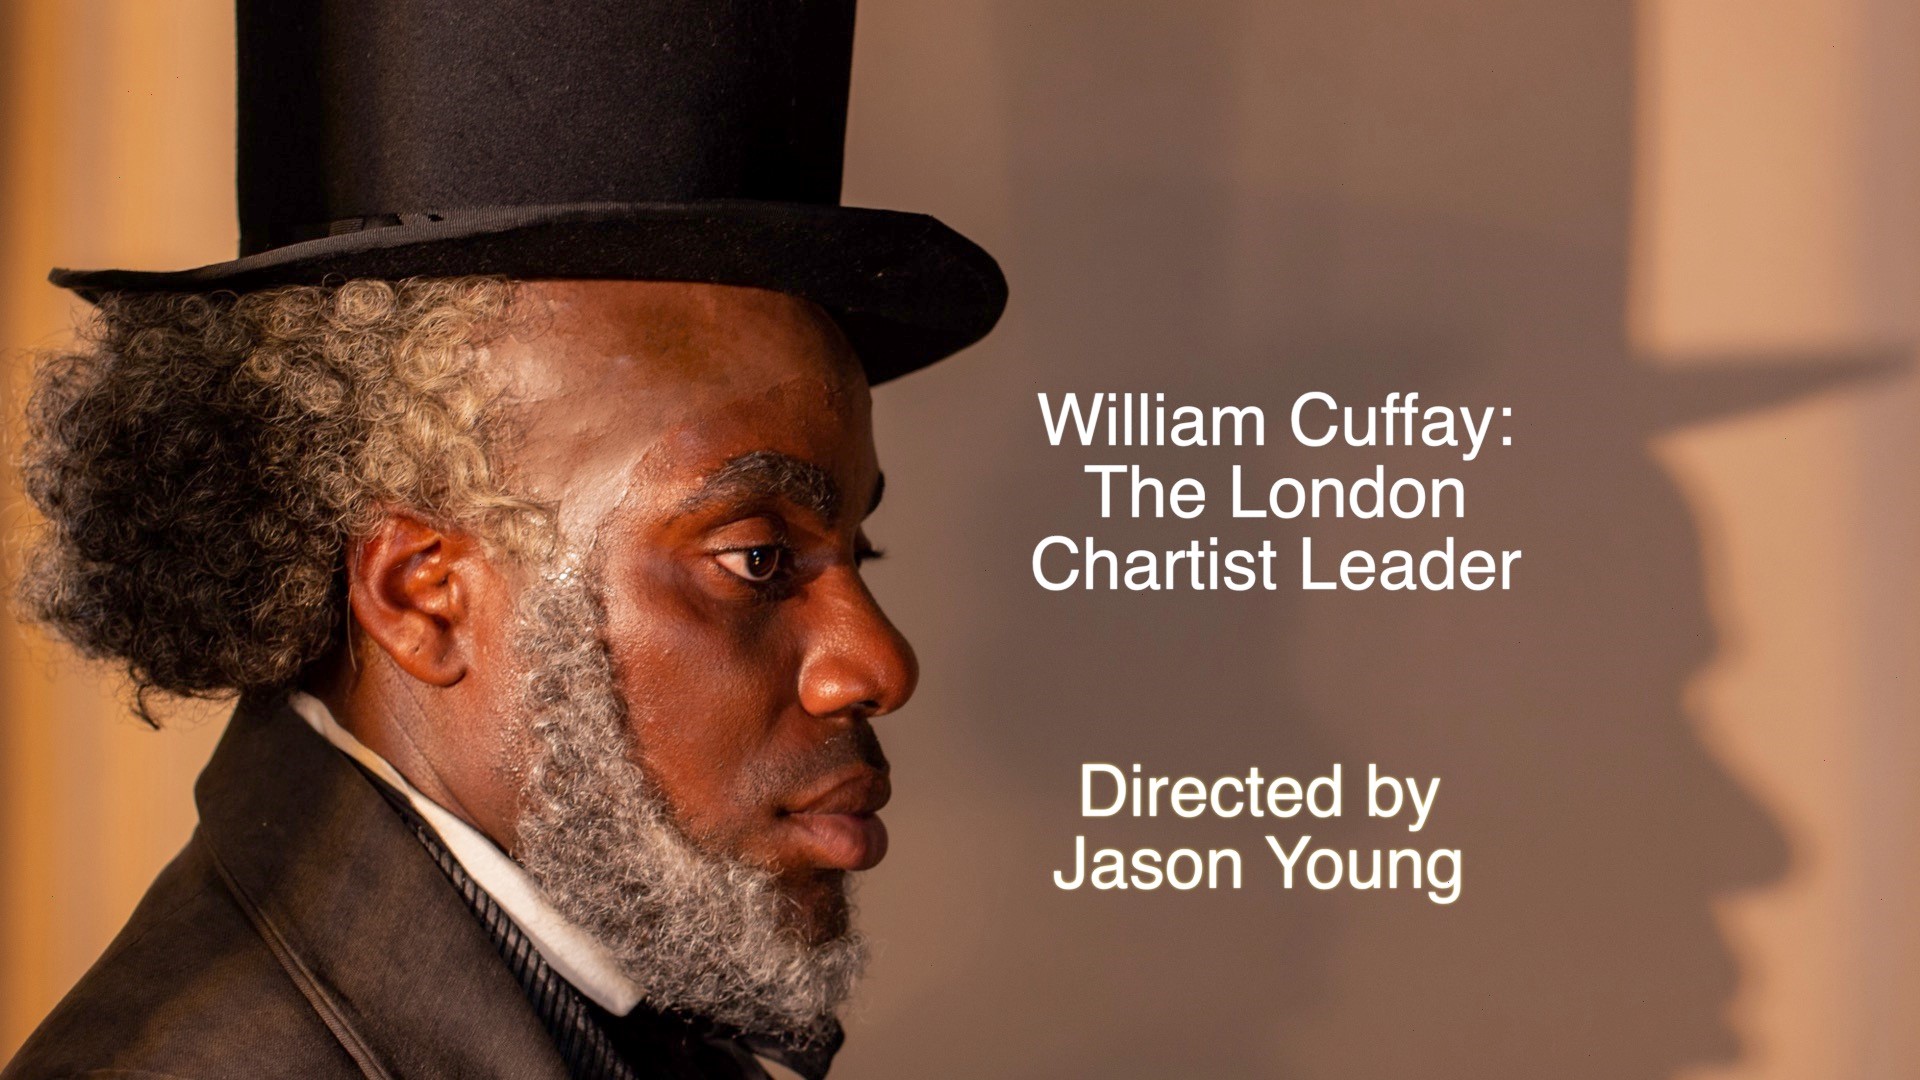 Poster advertising William Cuffey film directe dbyr Jason Young. Image shows photograph image of a profile of a black man with geey beard wearing a top hat